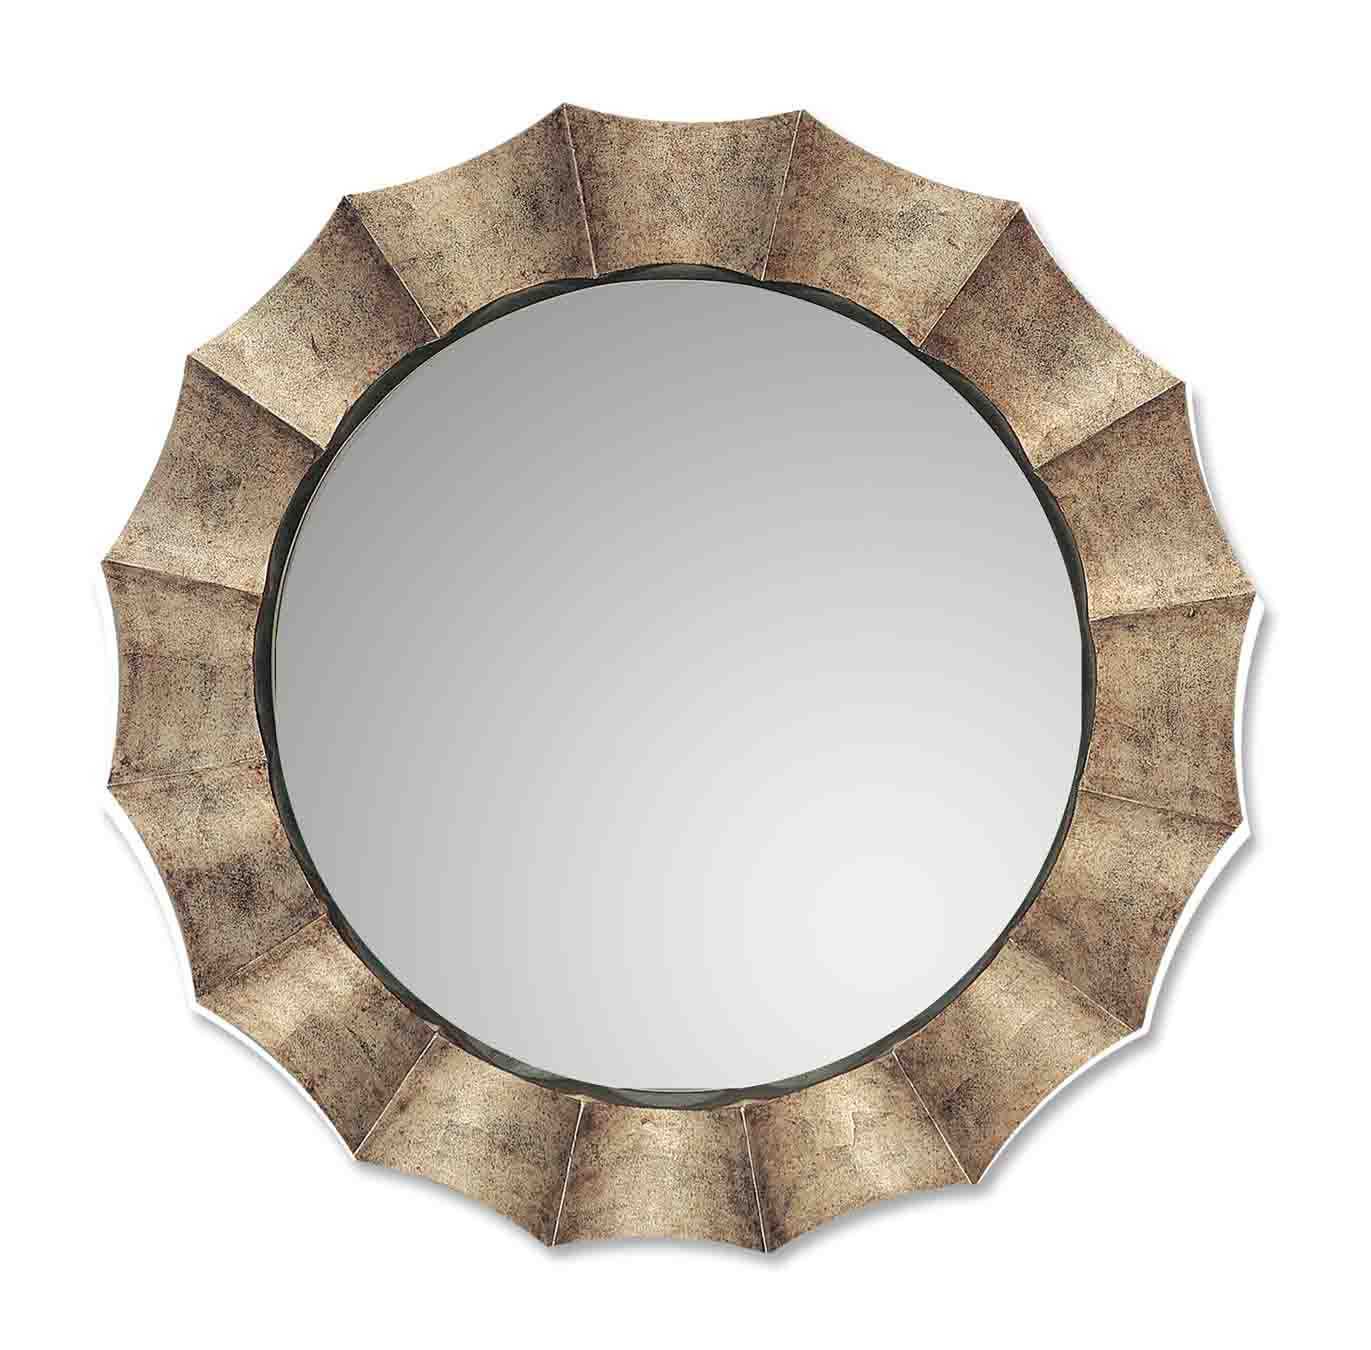 Modern Round Antiqued Silver Leaf Champagne Wall Mirror Large 41 With Regard To Antique Silver Round Wall Mirrors (View 12 of 15)